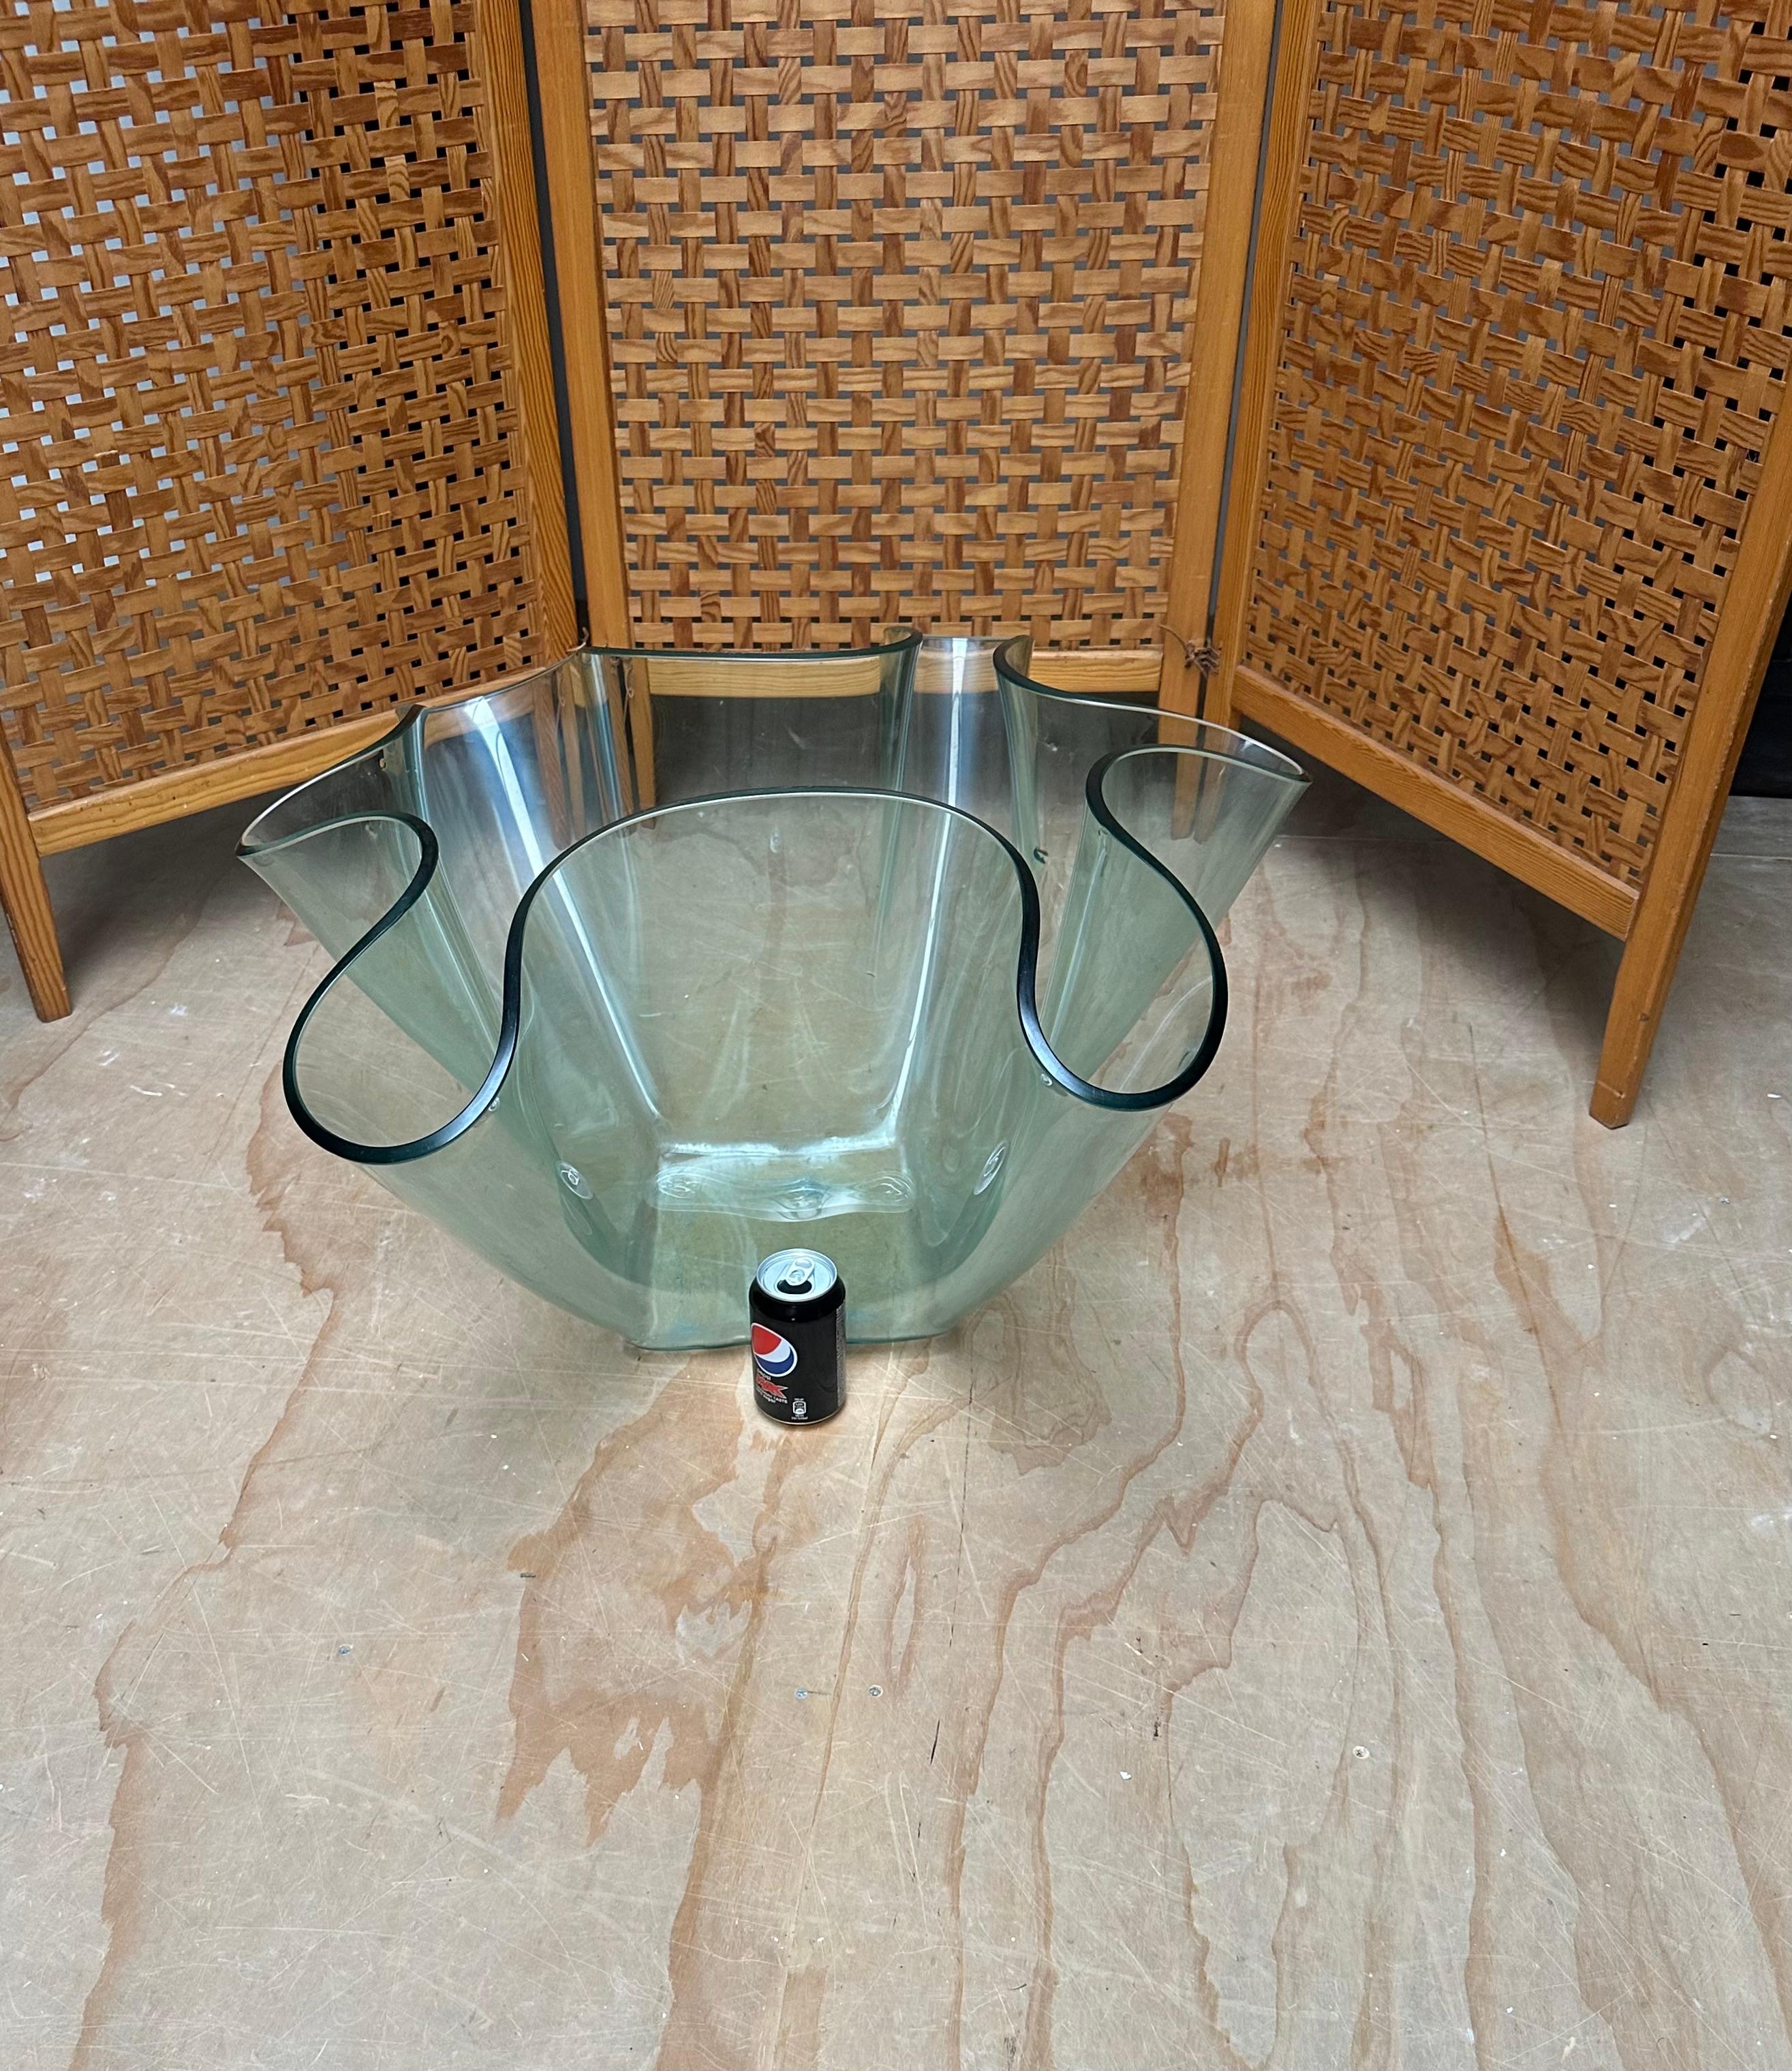 20th Century Exceptional Strong & Thick Curved Design Murano, Glass Art Floor Jardiniere Vase For Sale